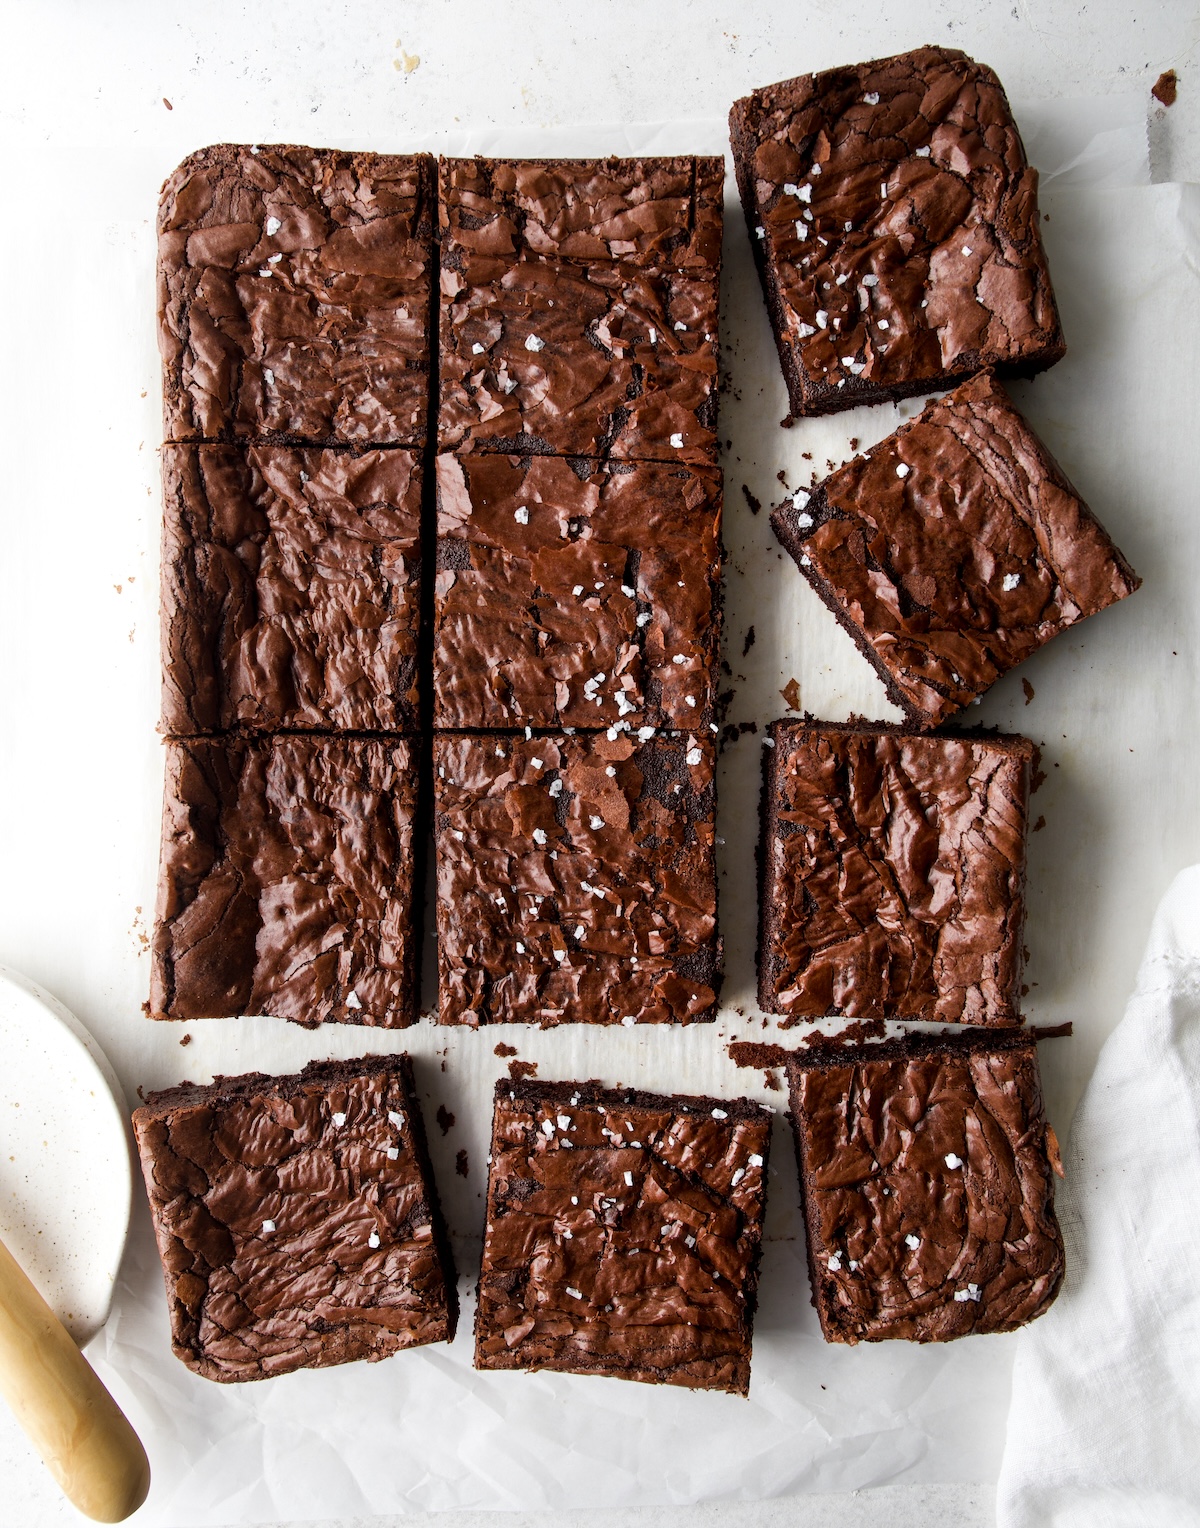 A whole batch of brownies cut into slices.